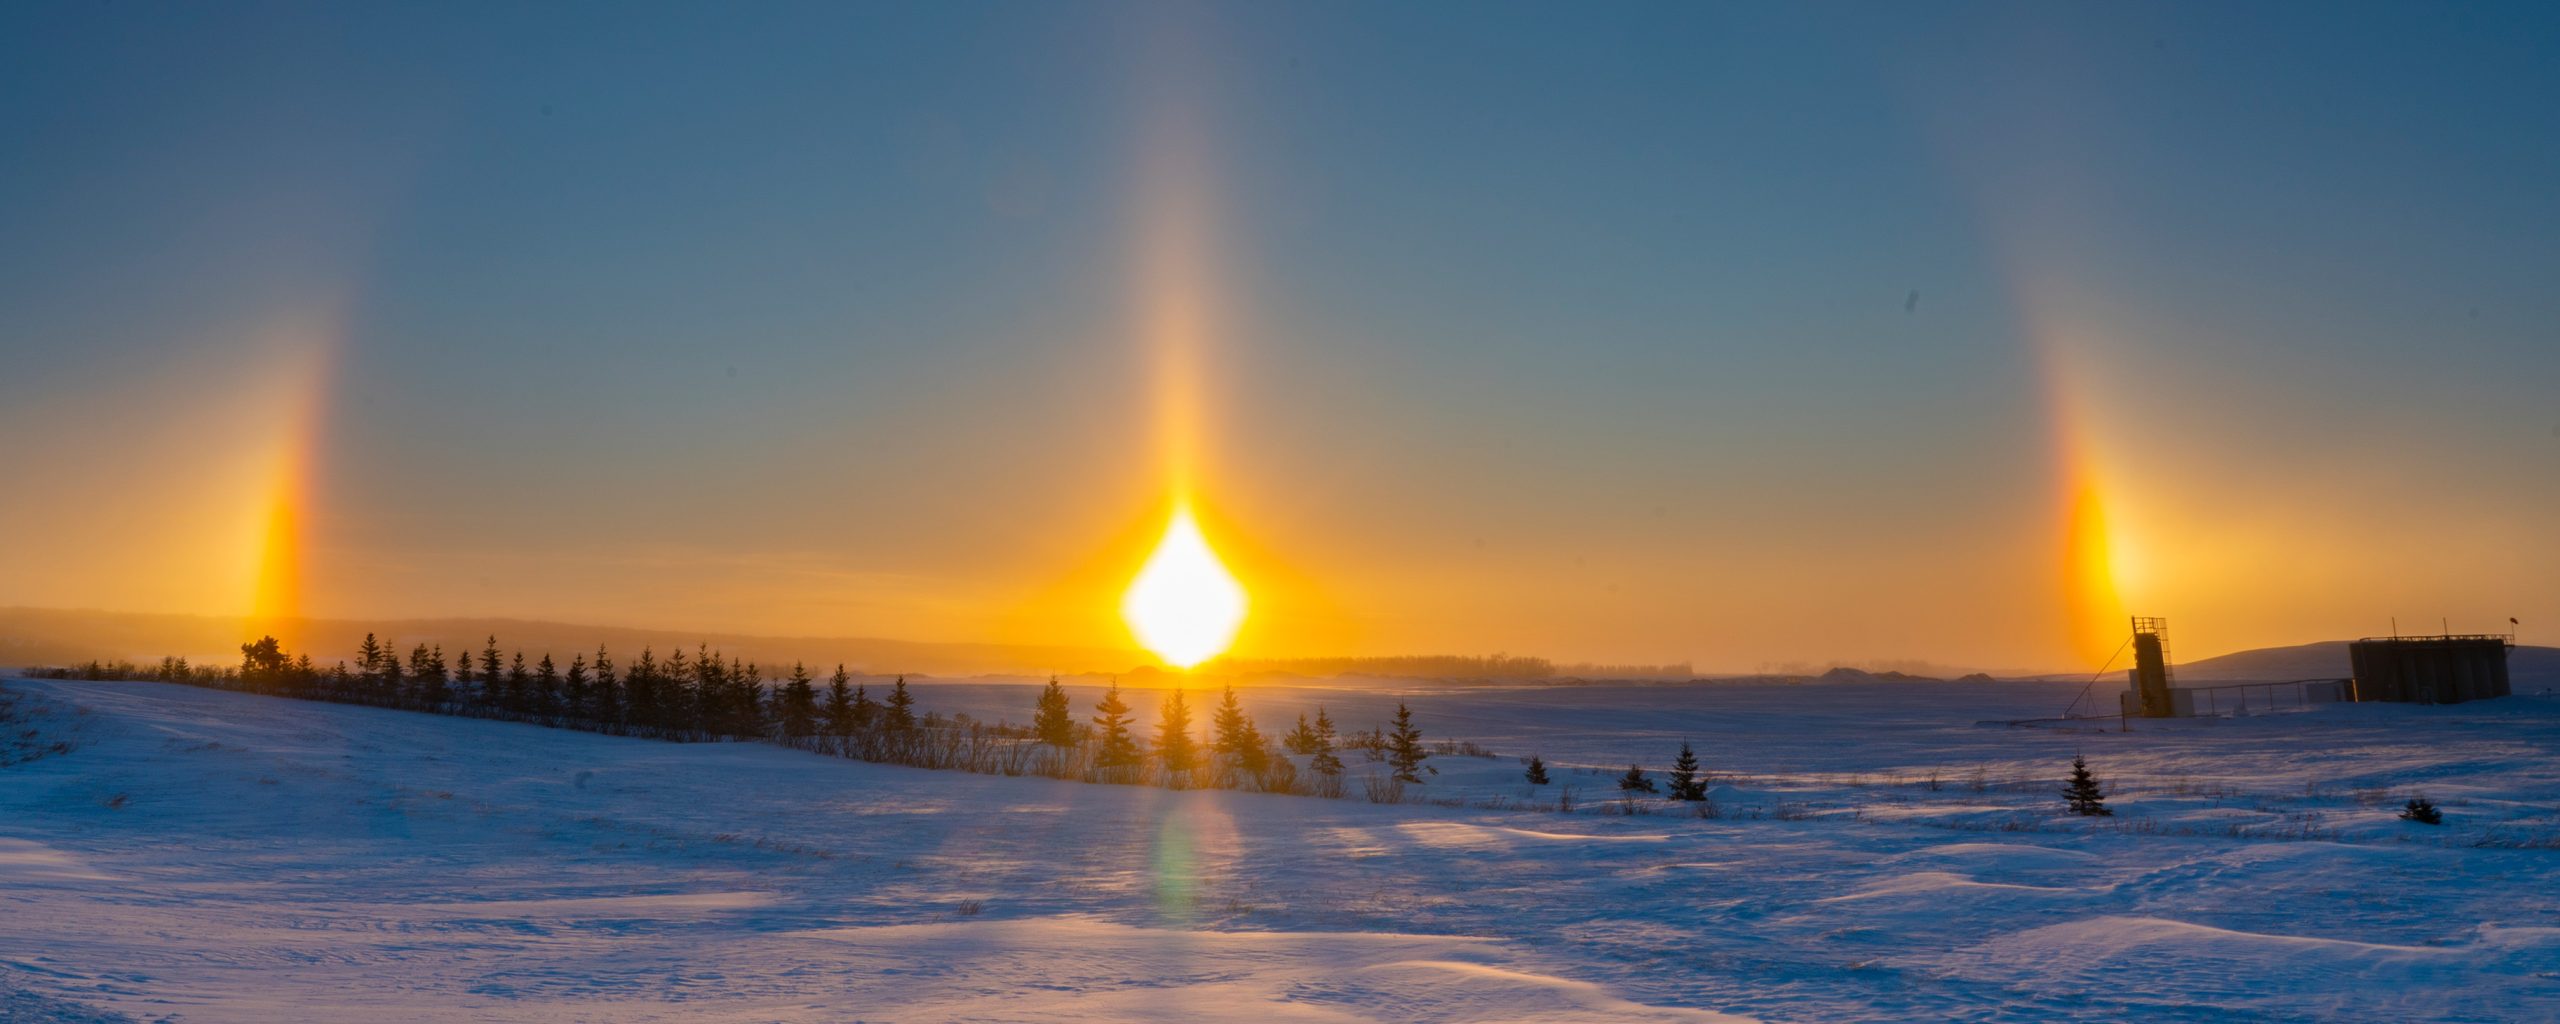 Sun Dogs of Winter form from ice crystals in the air